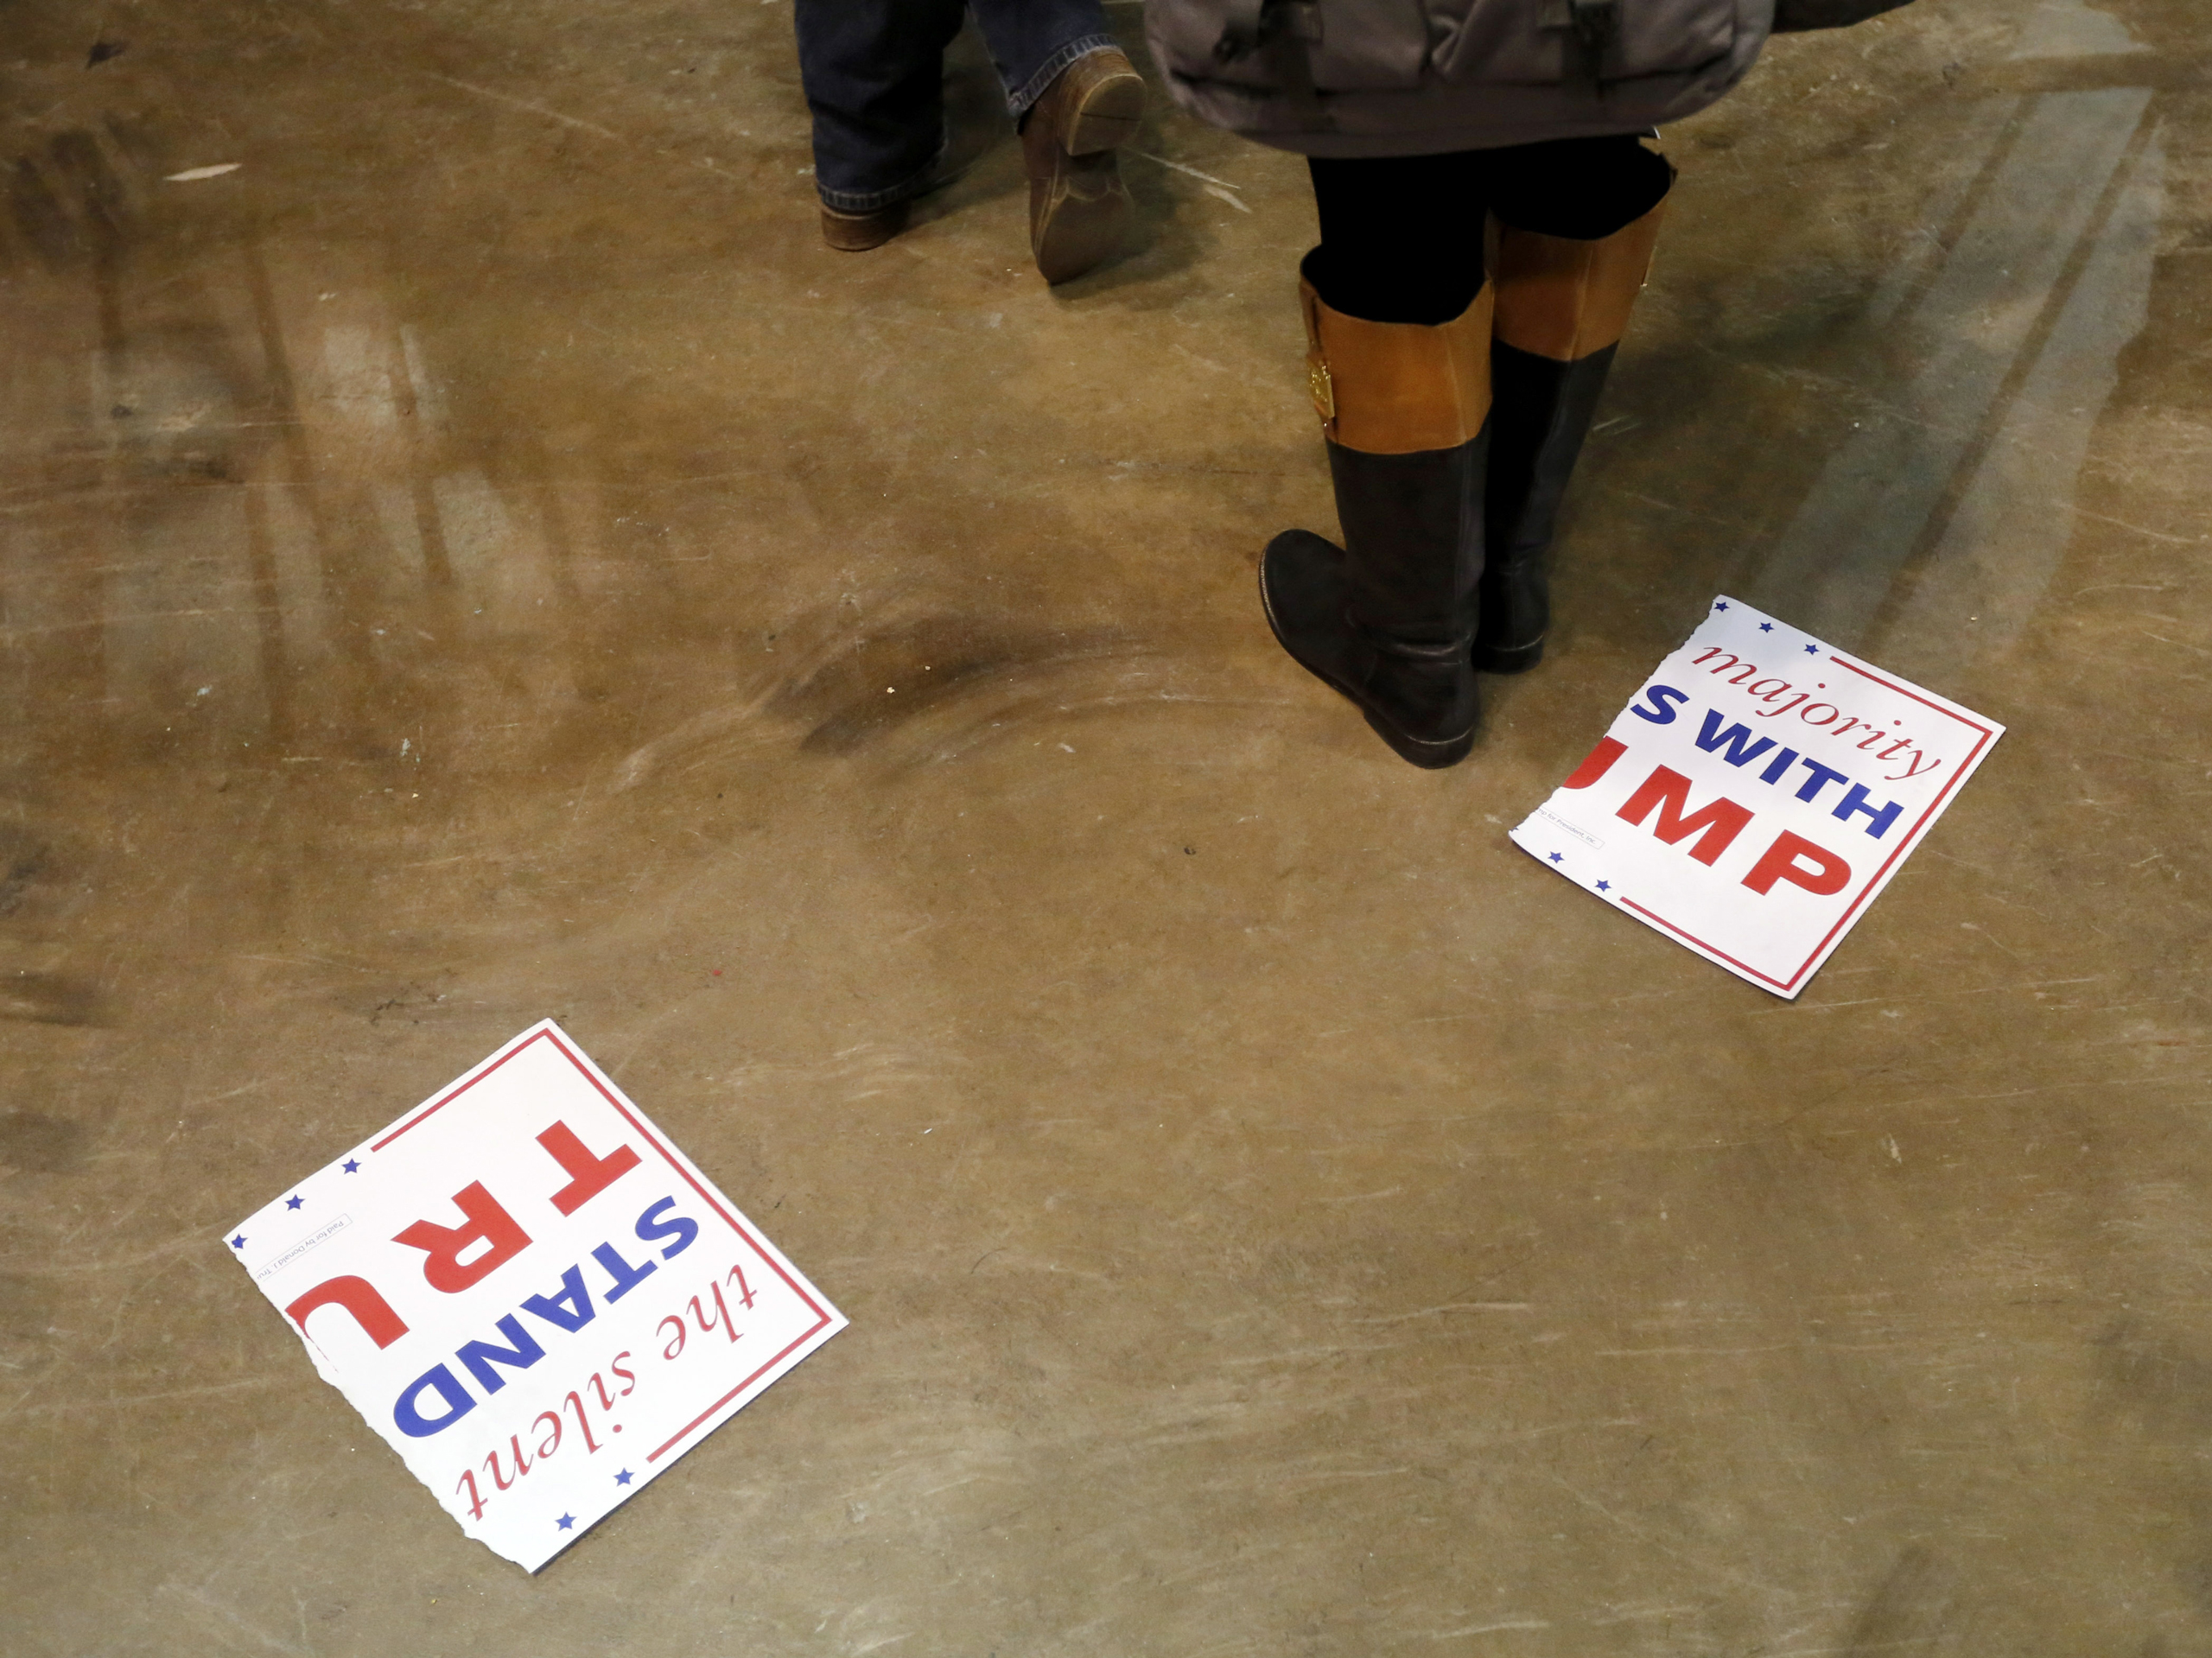 A torn campaign sign lays on the floor after a rally for Trump was canceled due to security concerns at the University of Illinois-Chicago in Chicago on March 11, 2016. (Charles Rex Arbogast—AP)